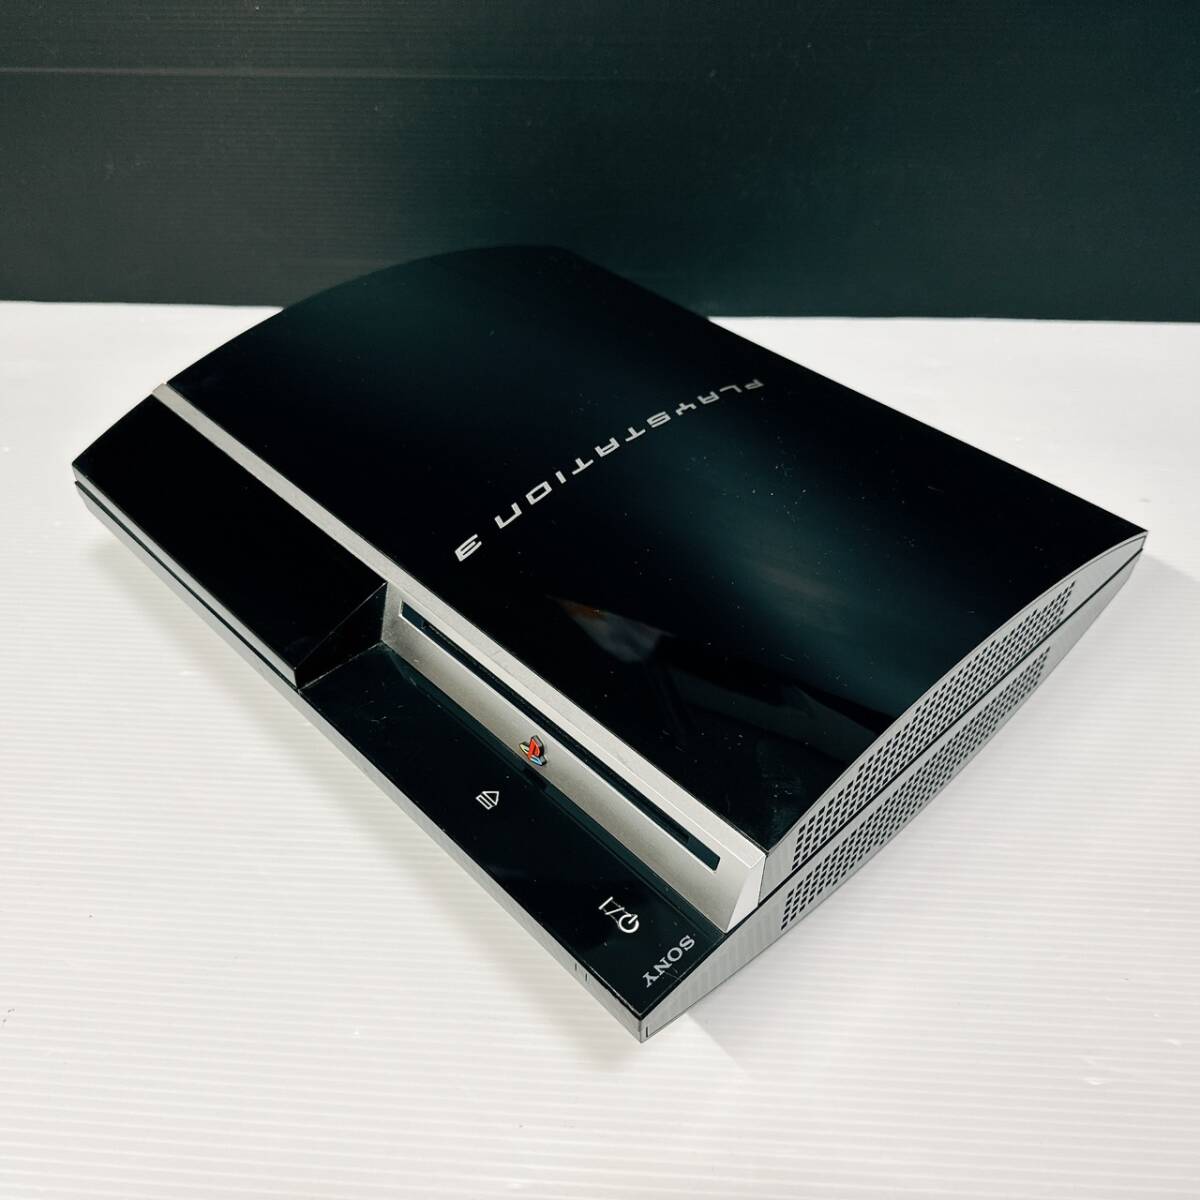  electrification has confirmed PS3 PlayStation 3 PlayStation3 CECHH00 40GB Sony SONY body outer box / inside box / printed matter / controller attached beautiful goods / Junk 